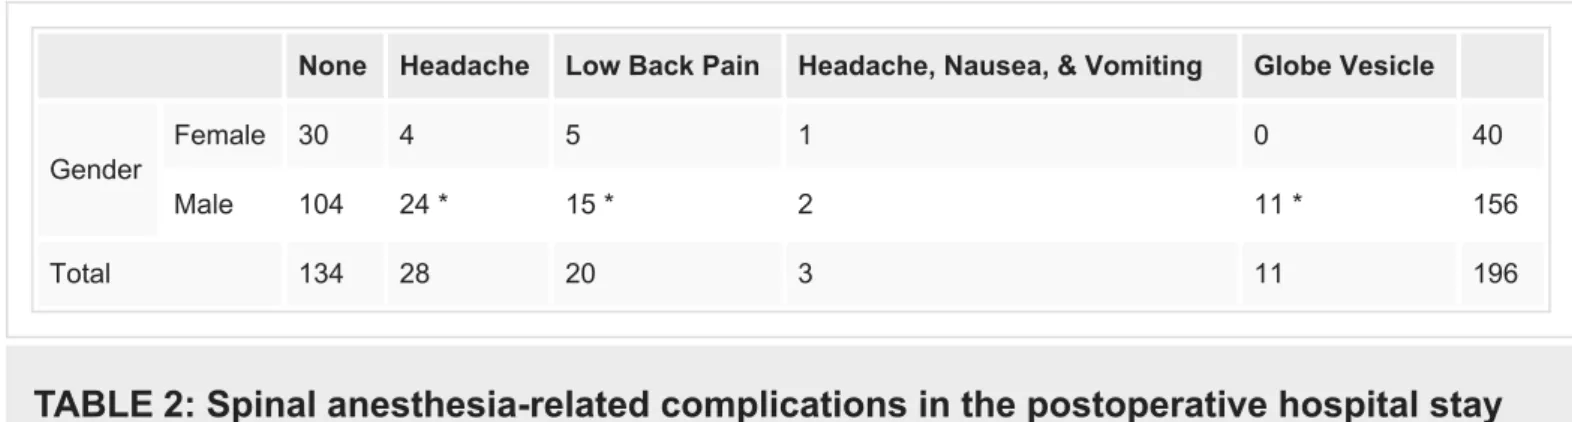 TABLE 2: Spinal anesthesia-related complications in the postoperative hospital stay in all patients